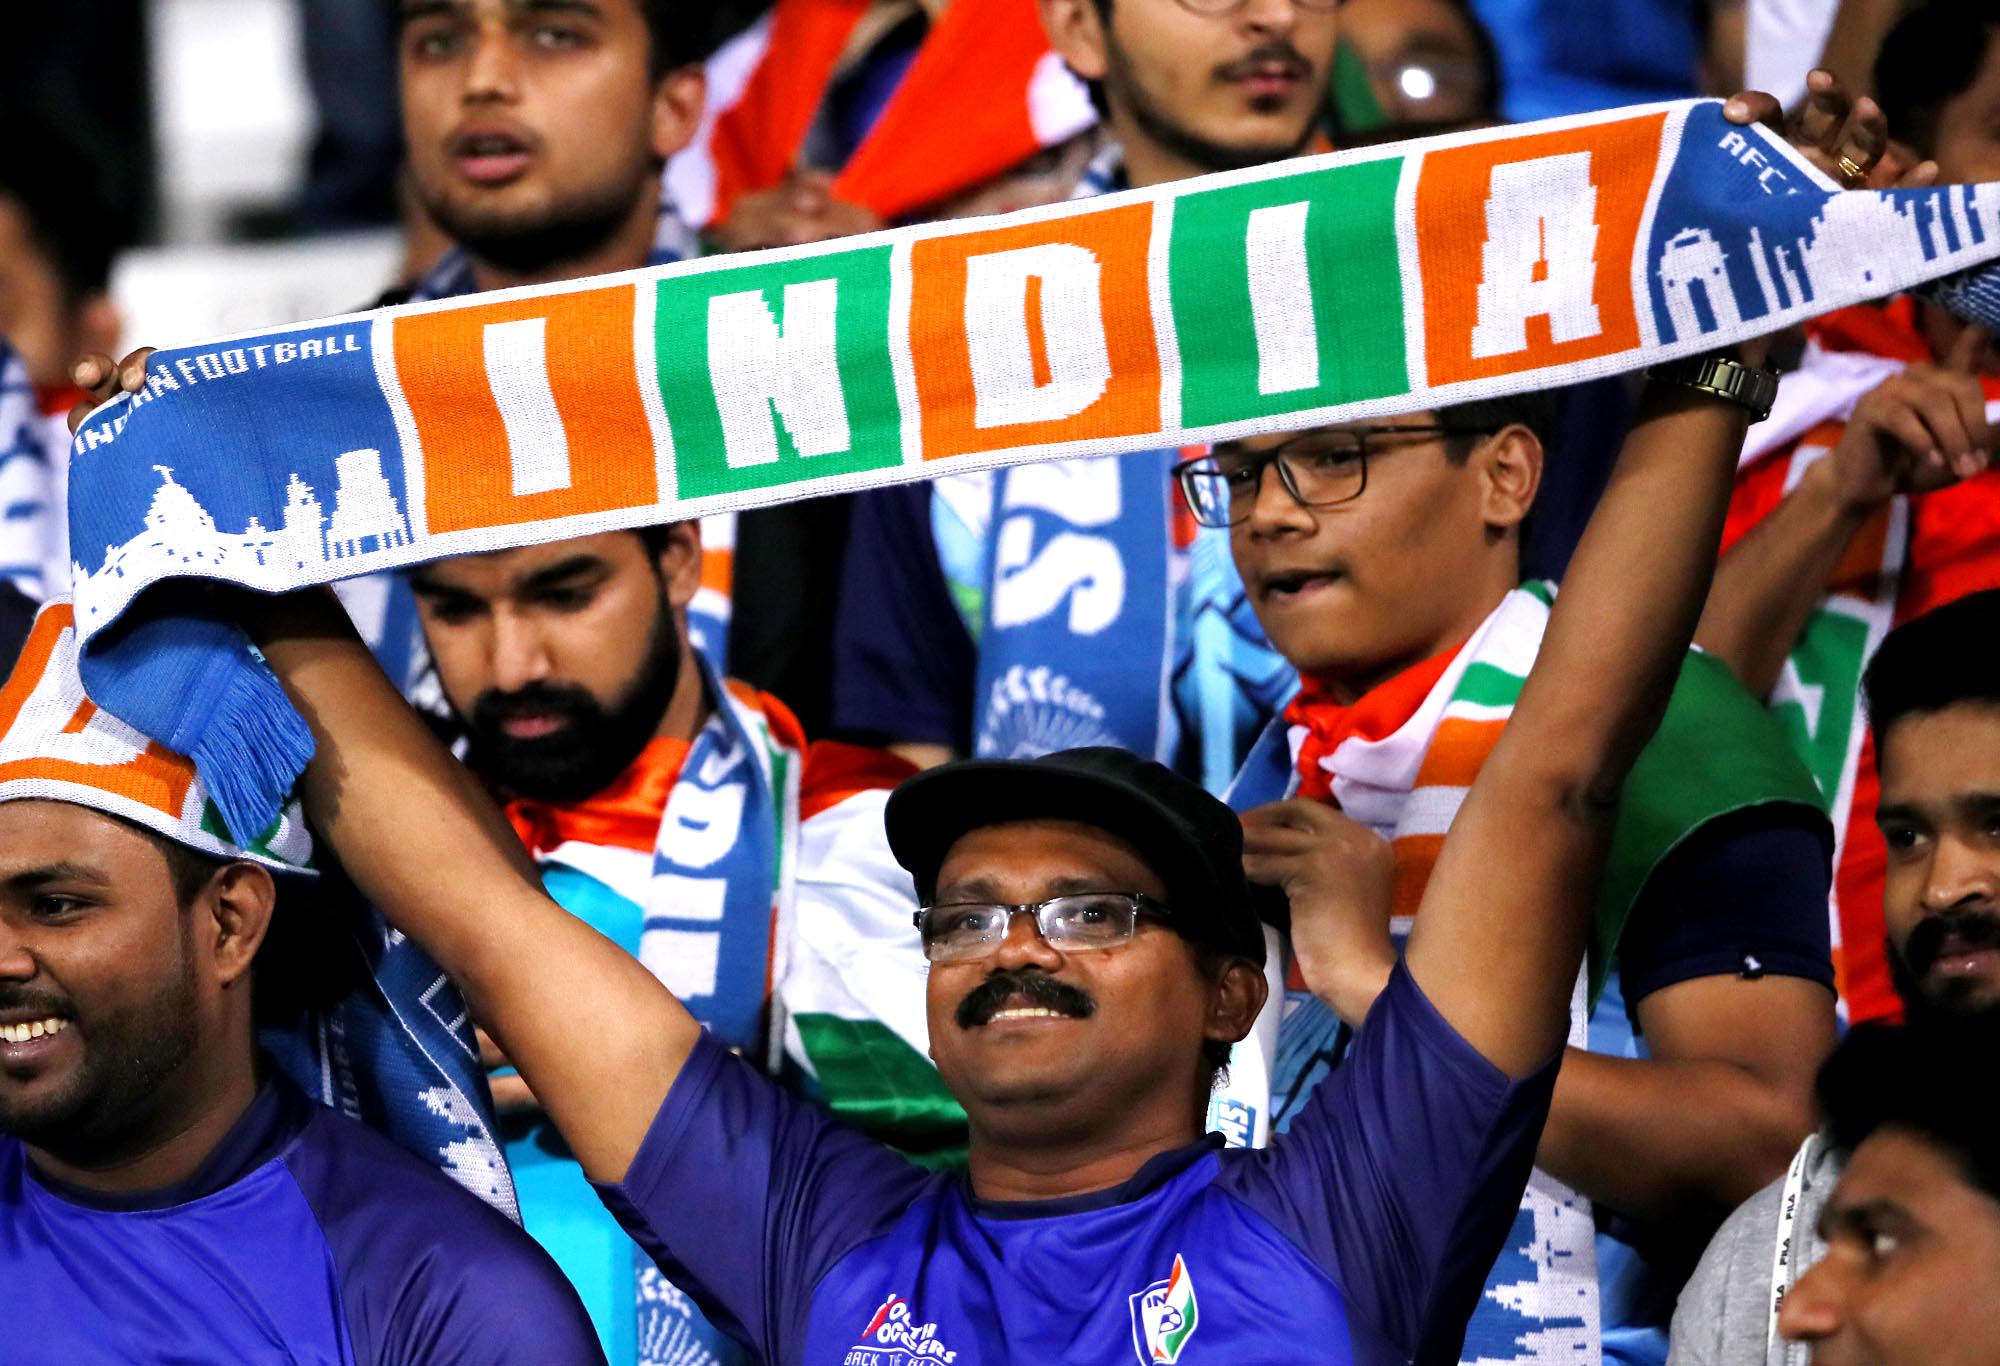 An Indian football fan holds aloft a scarf with the word 'INDIA' printed on it.